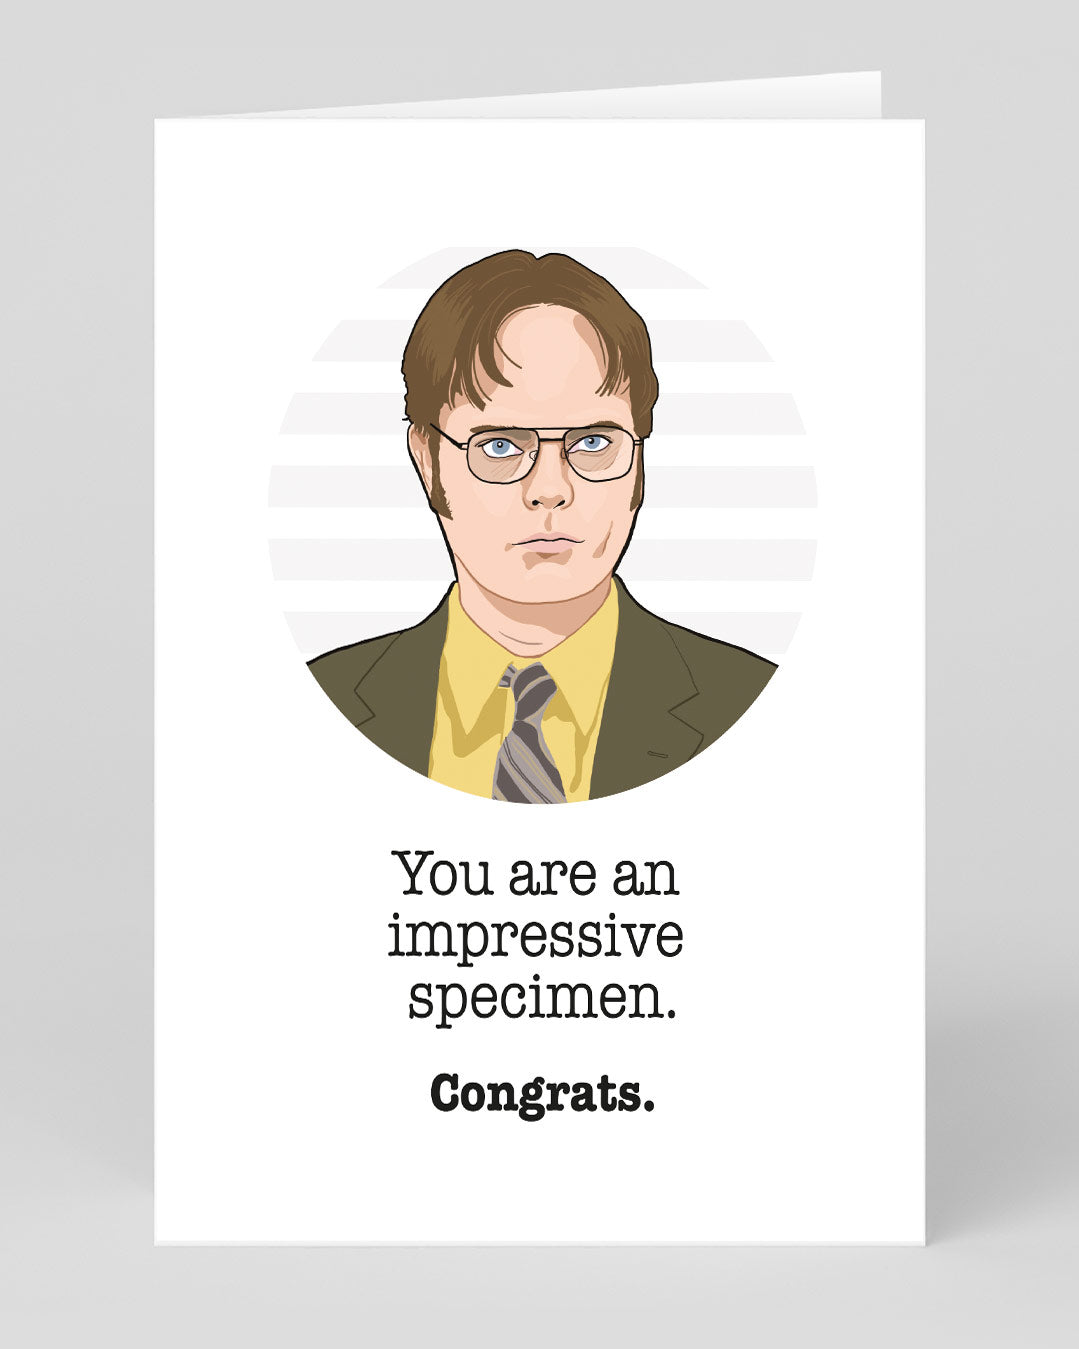 Valentine’s Day | Funny Valentines Card For The Office Fans | Dwight Schrute Impressive Specimen Greeting Card | Ohh Deer Unique Valentine’s Card for Him or Her | Made In The UK, Eco-Friendly Materials, Plastic Free Packaging